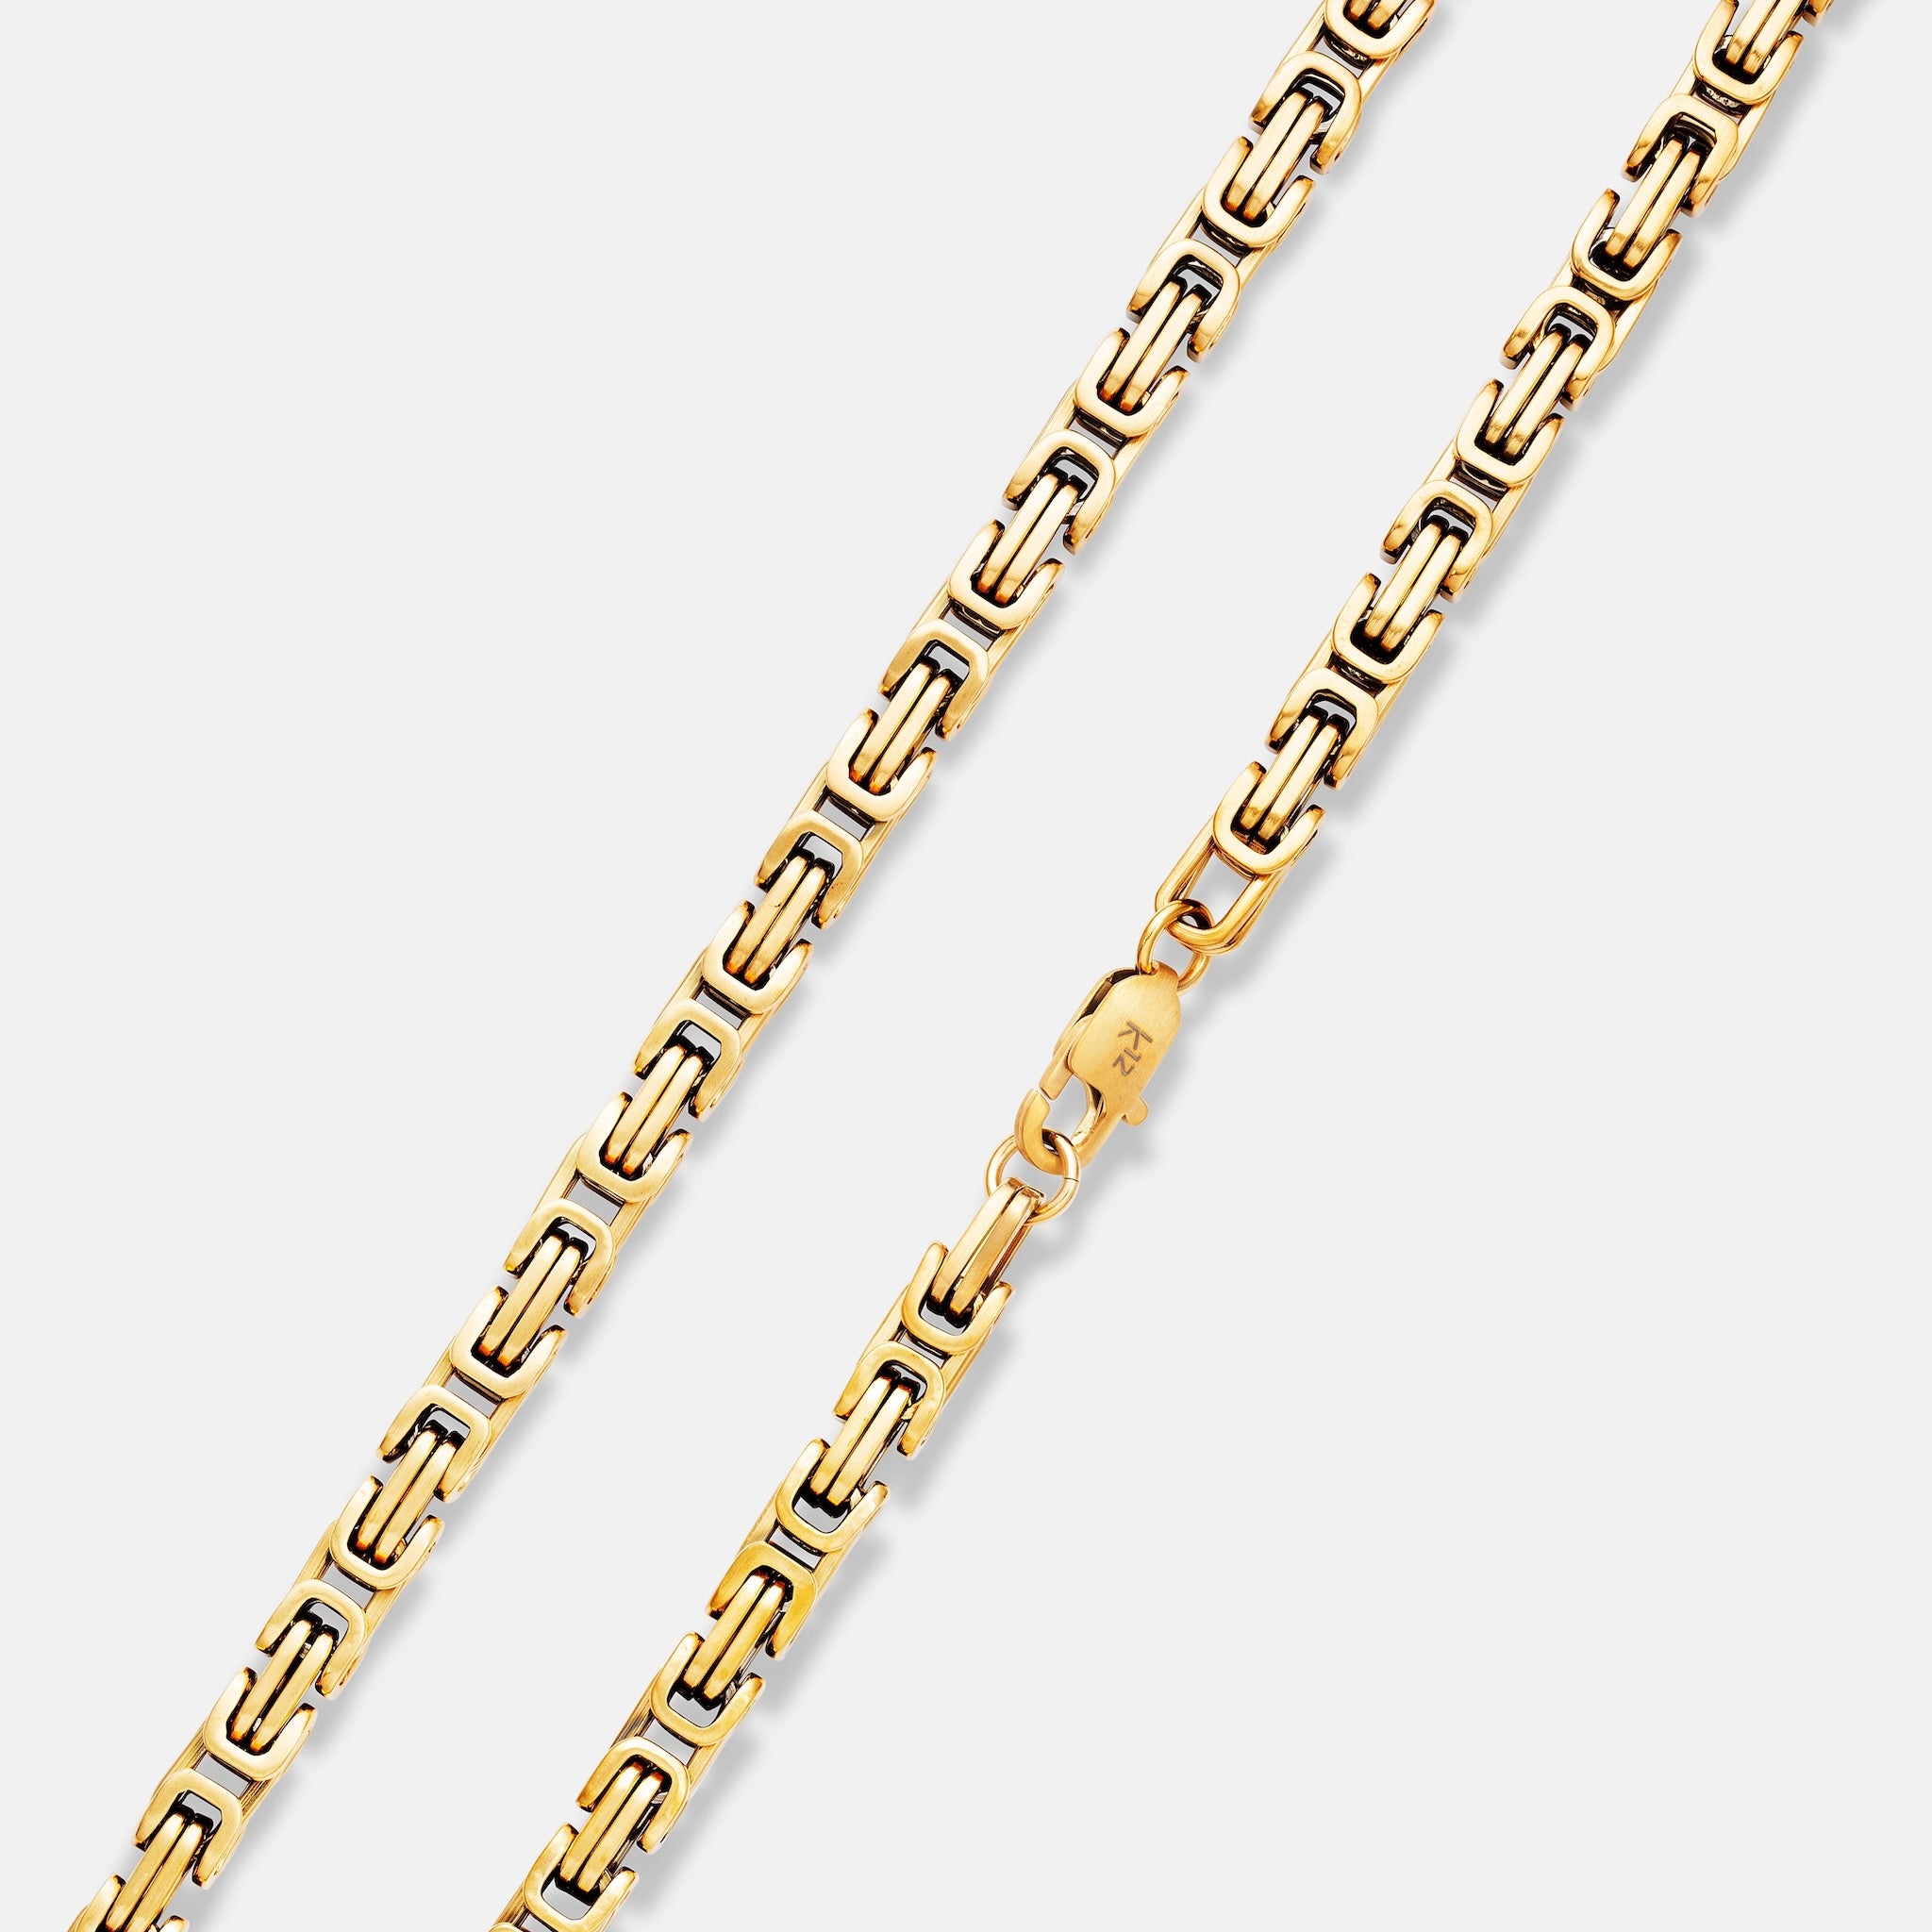 K12 - GOLD KING CHAIN - 6.2MM